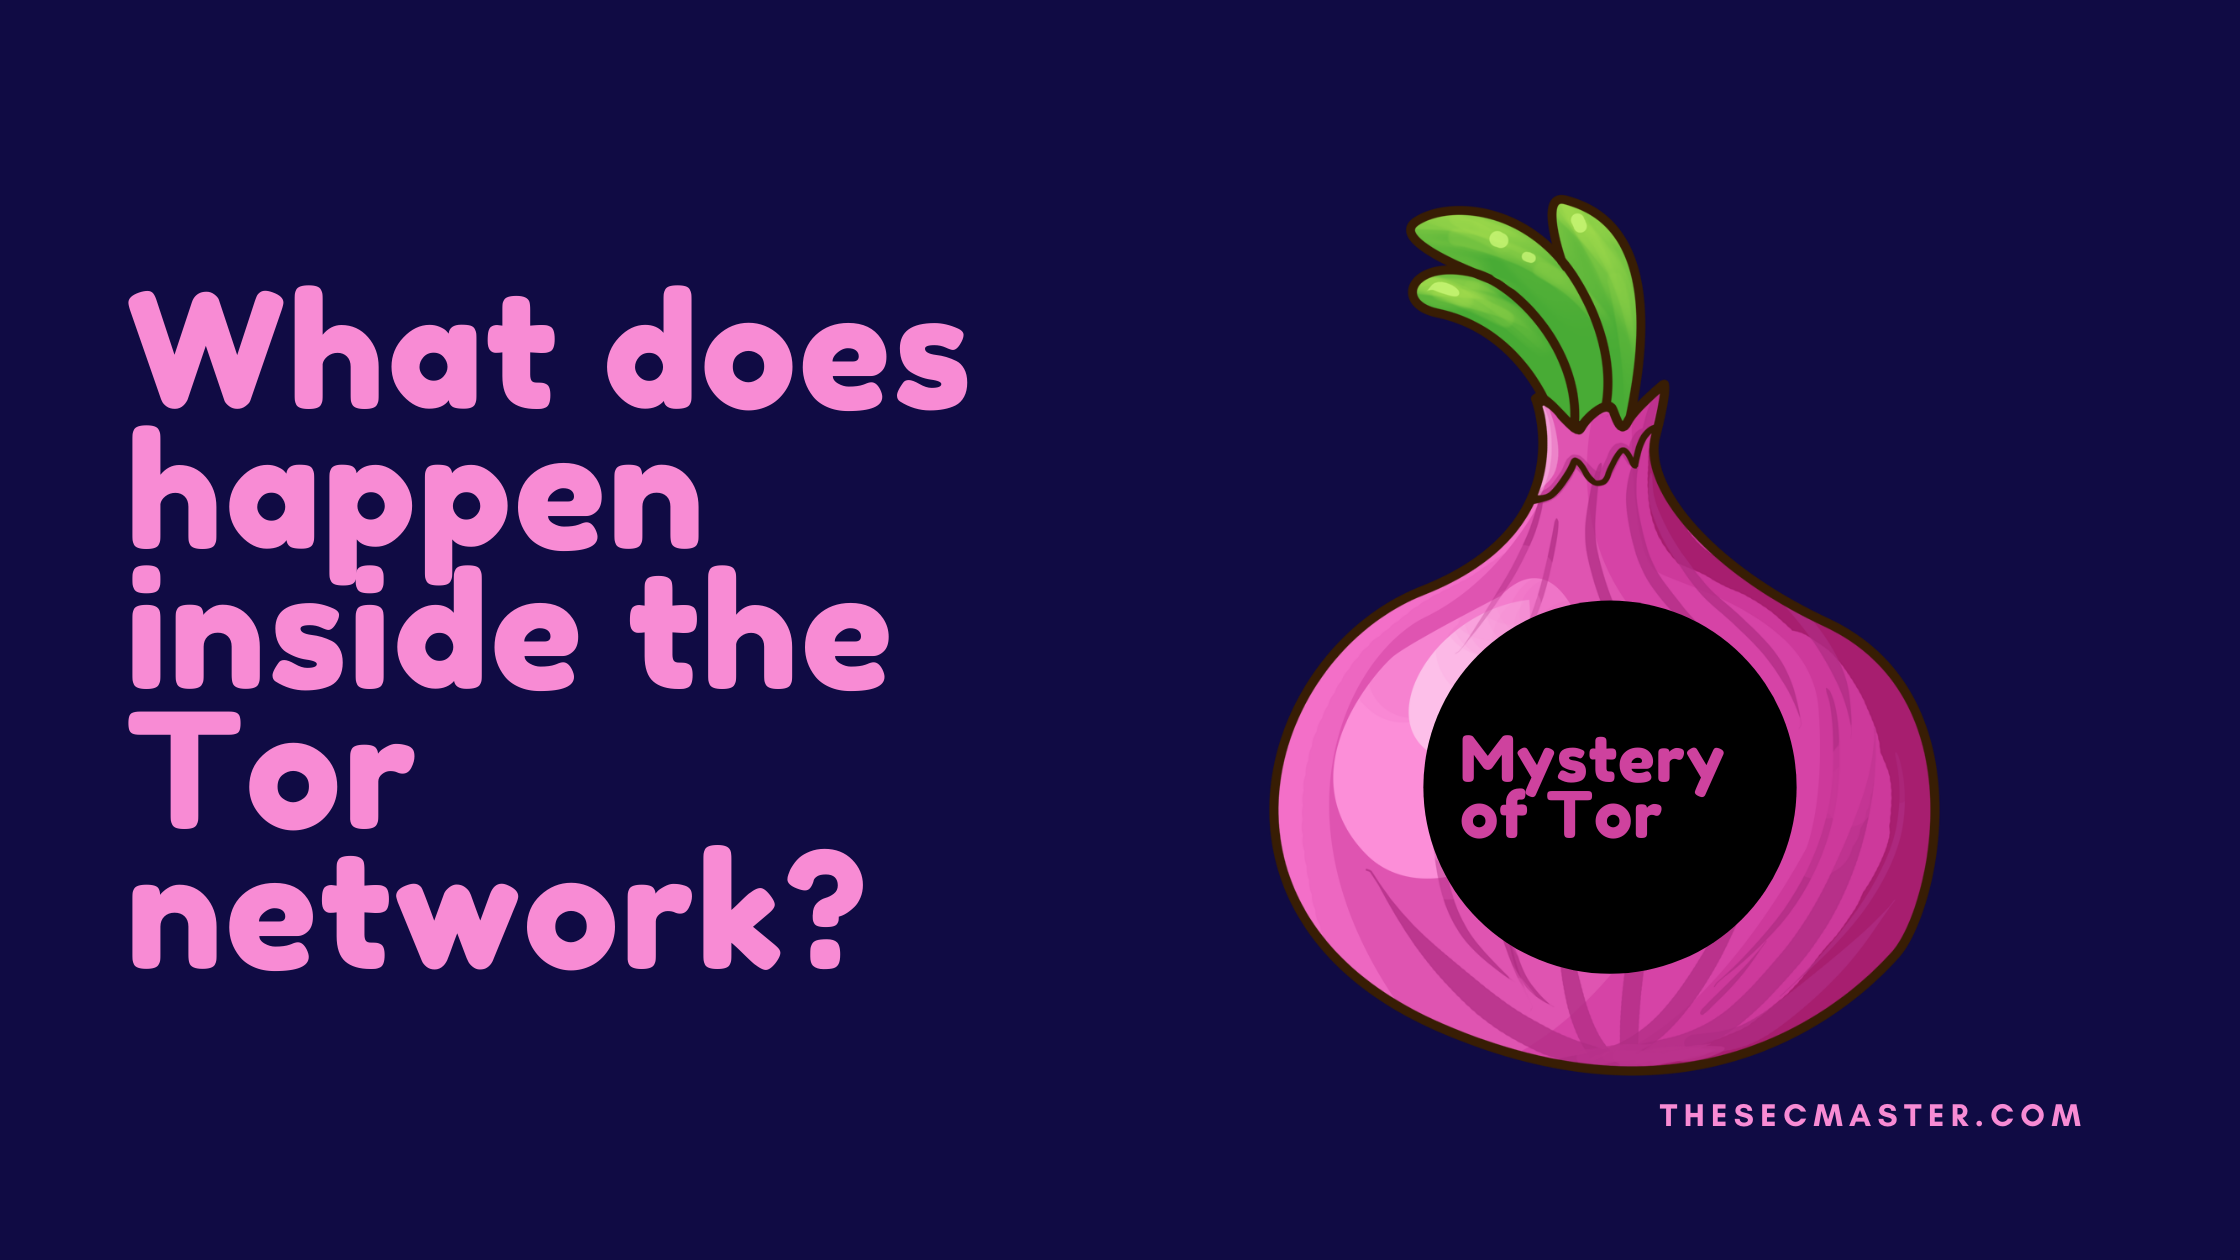 What Does Happen Inside The Tor Network How Does The Tor Network Work